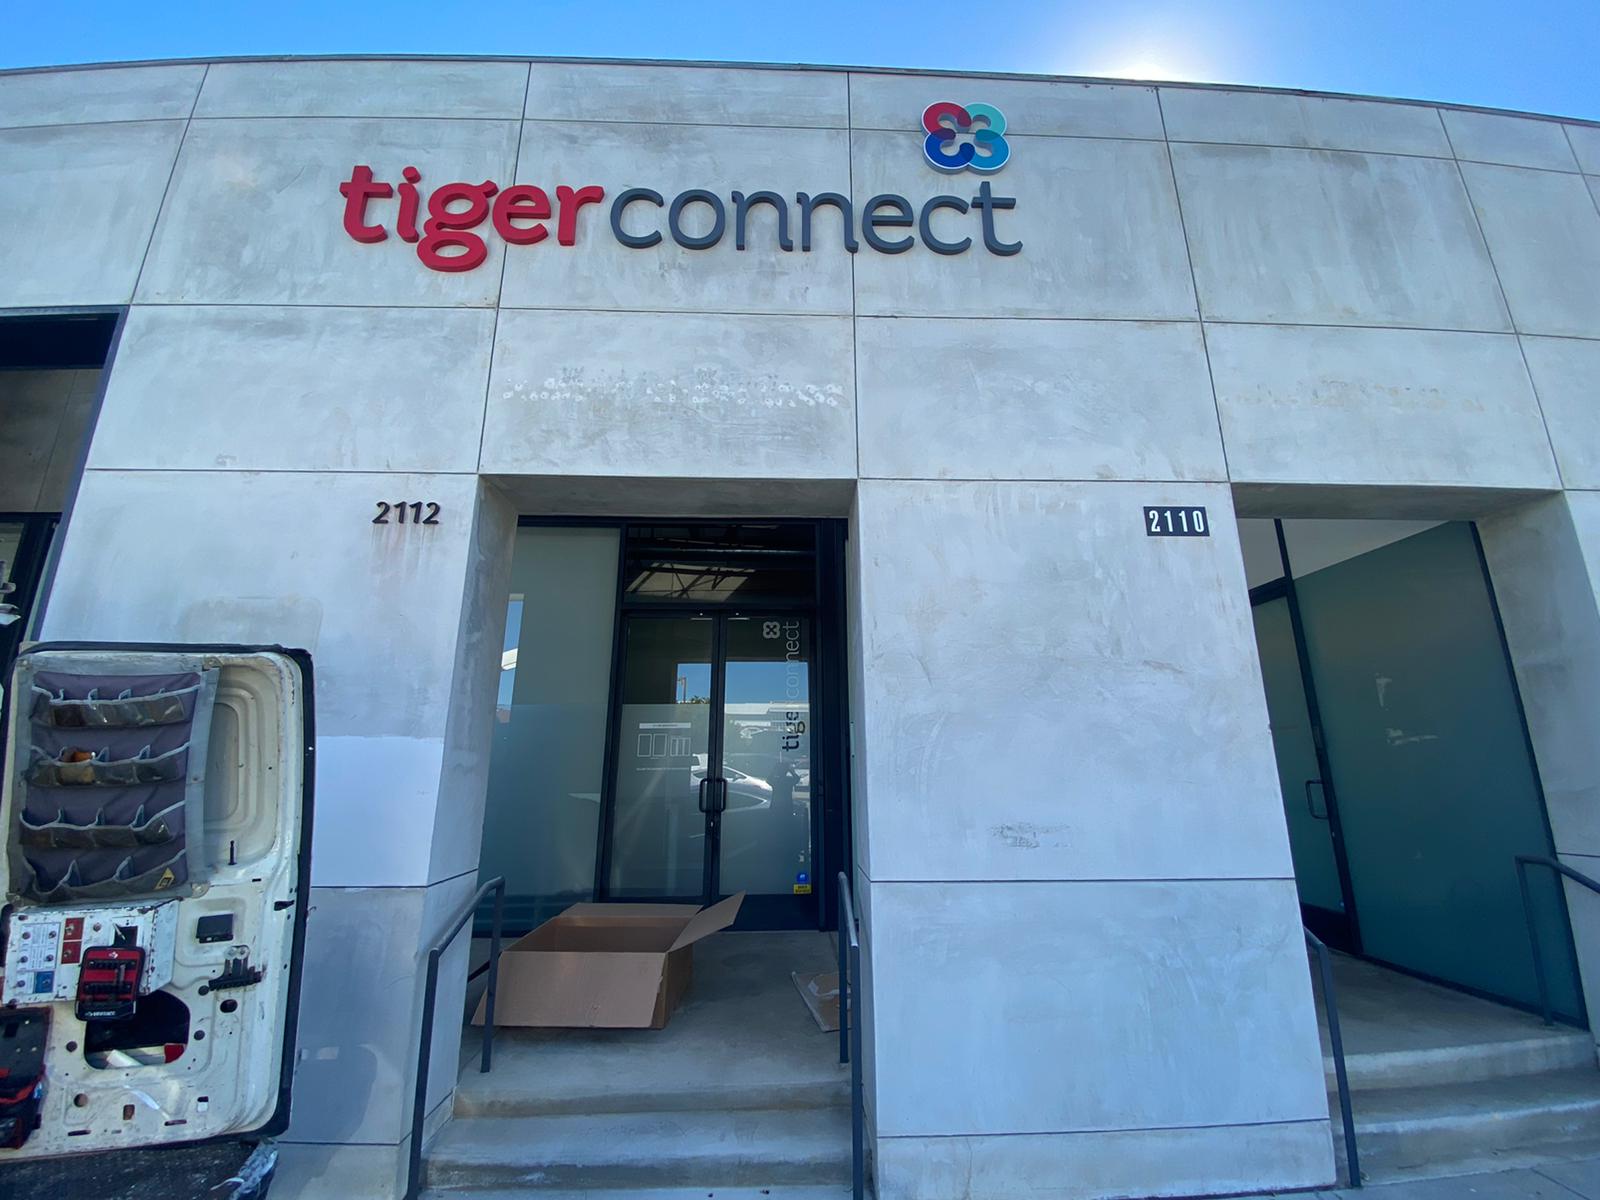 This dimensional letter sign is part of our business sign package for TigerConnect. With this exterior sign, their Santa Monica office will stand out.